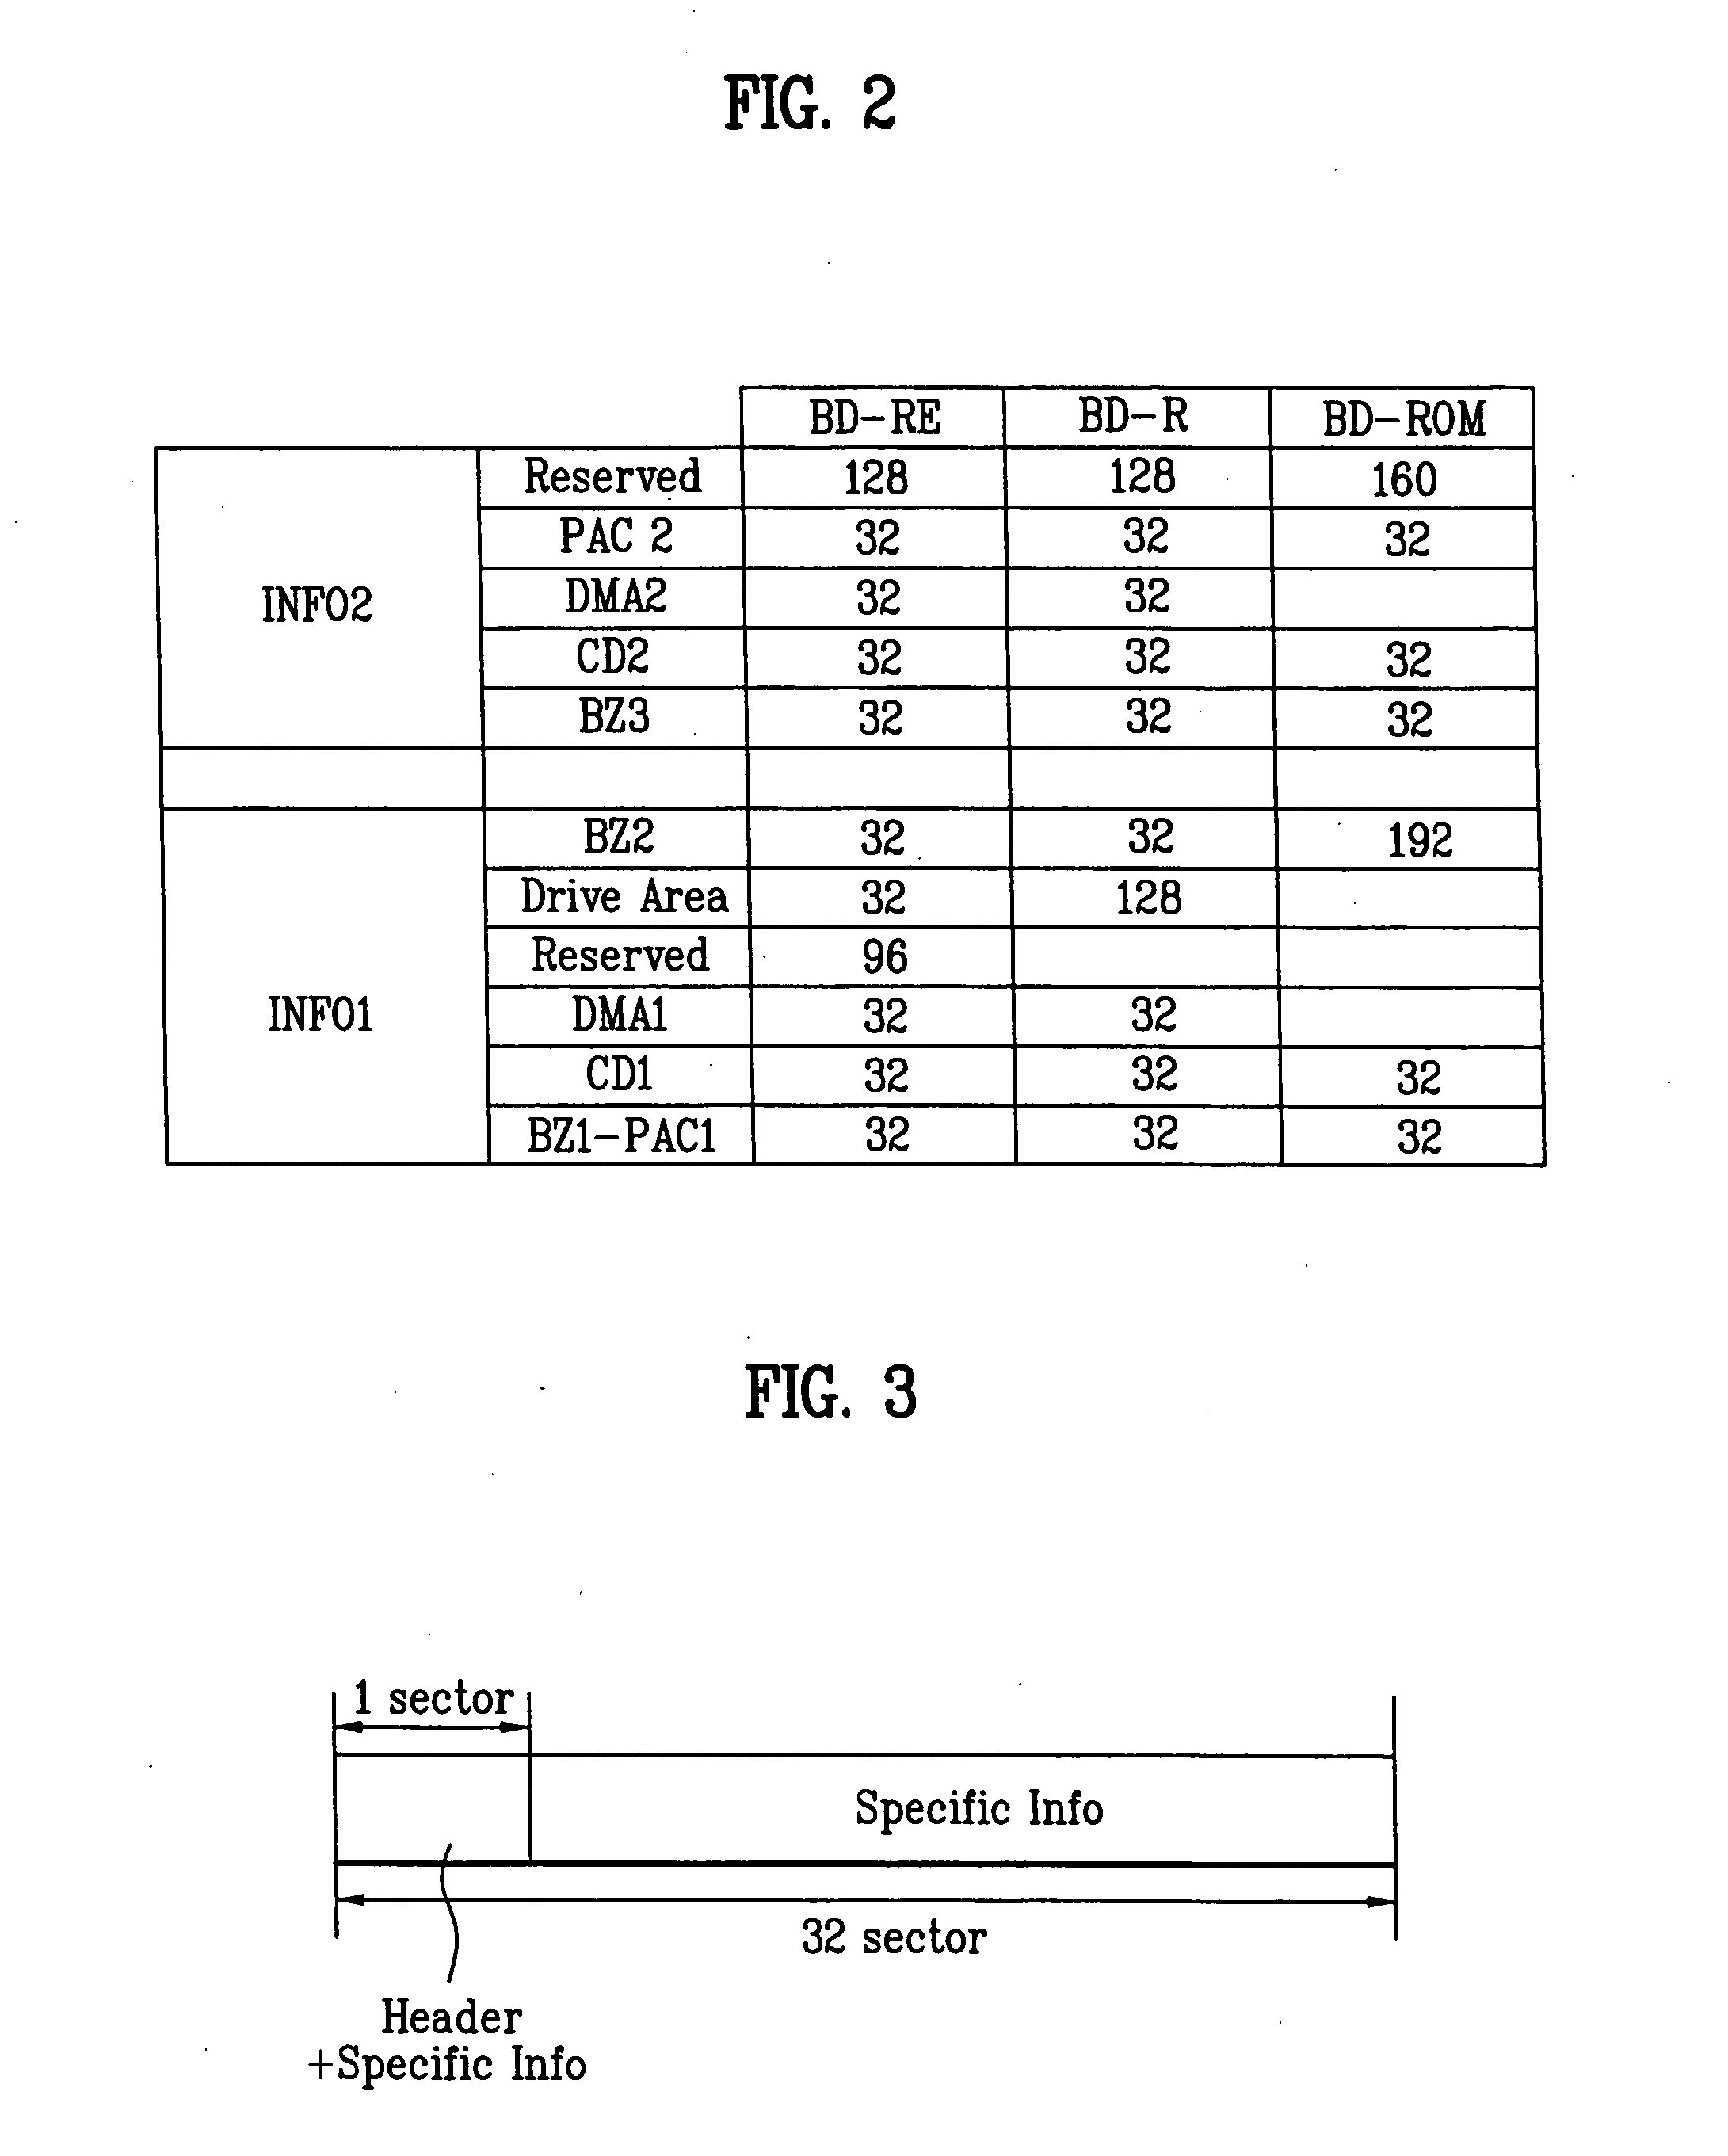 Recording medium with segment information thereon and apparatus and methods for forming, recording, and reproducing the recording medium